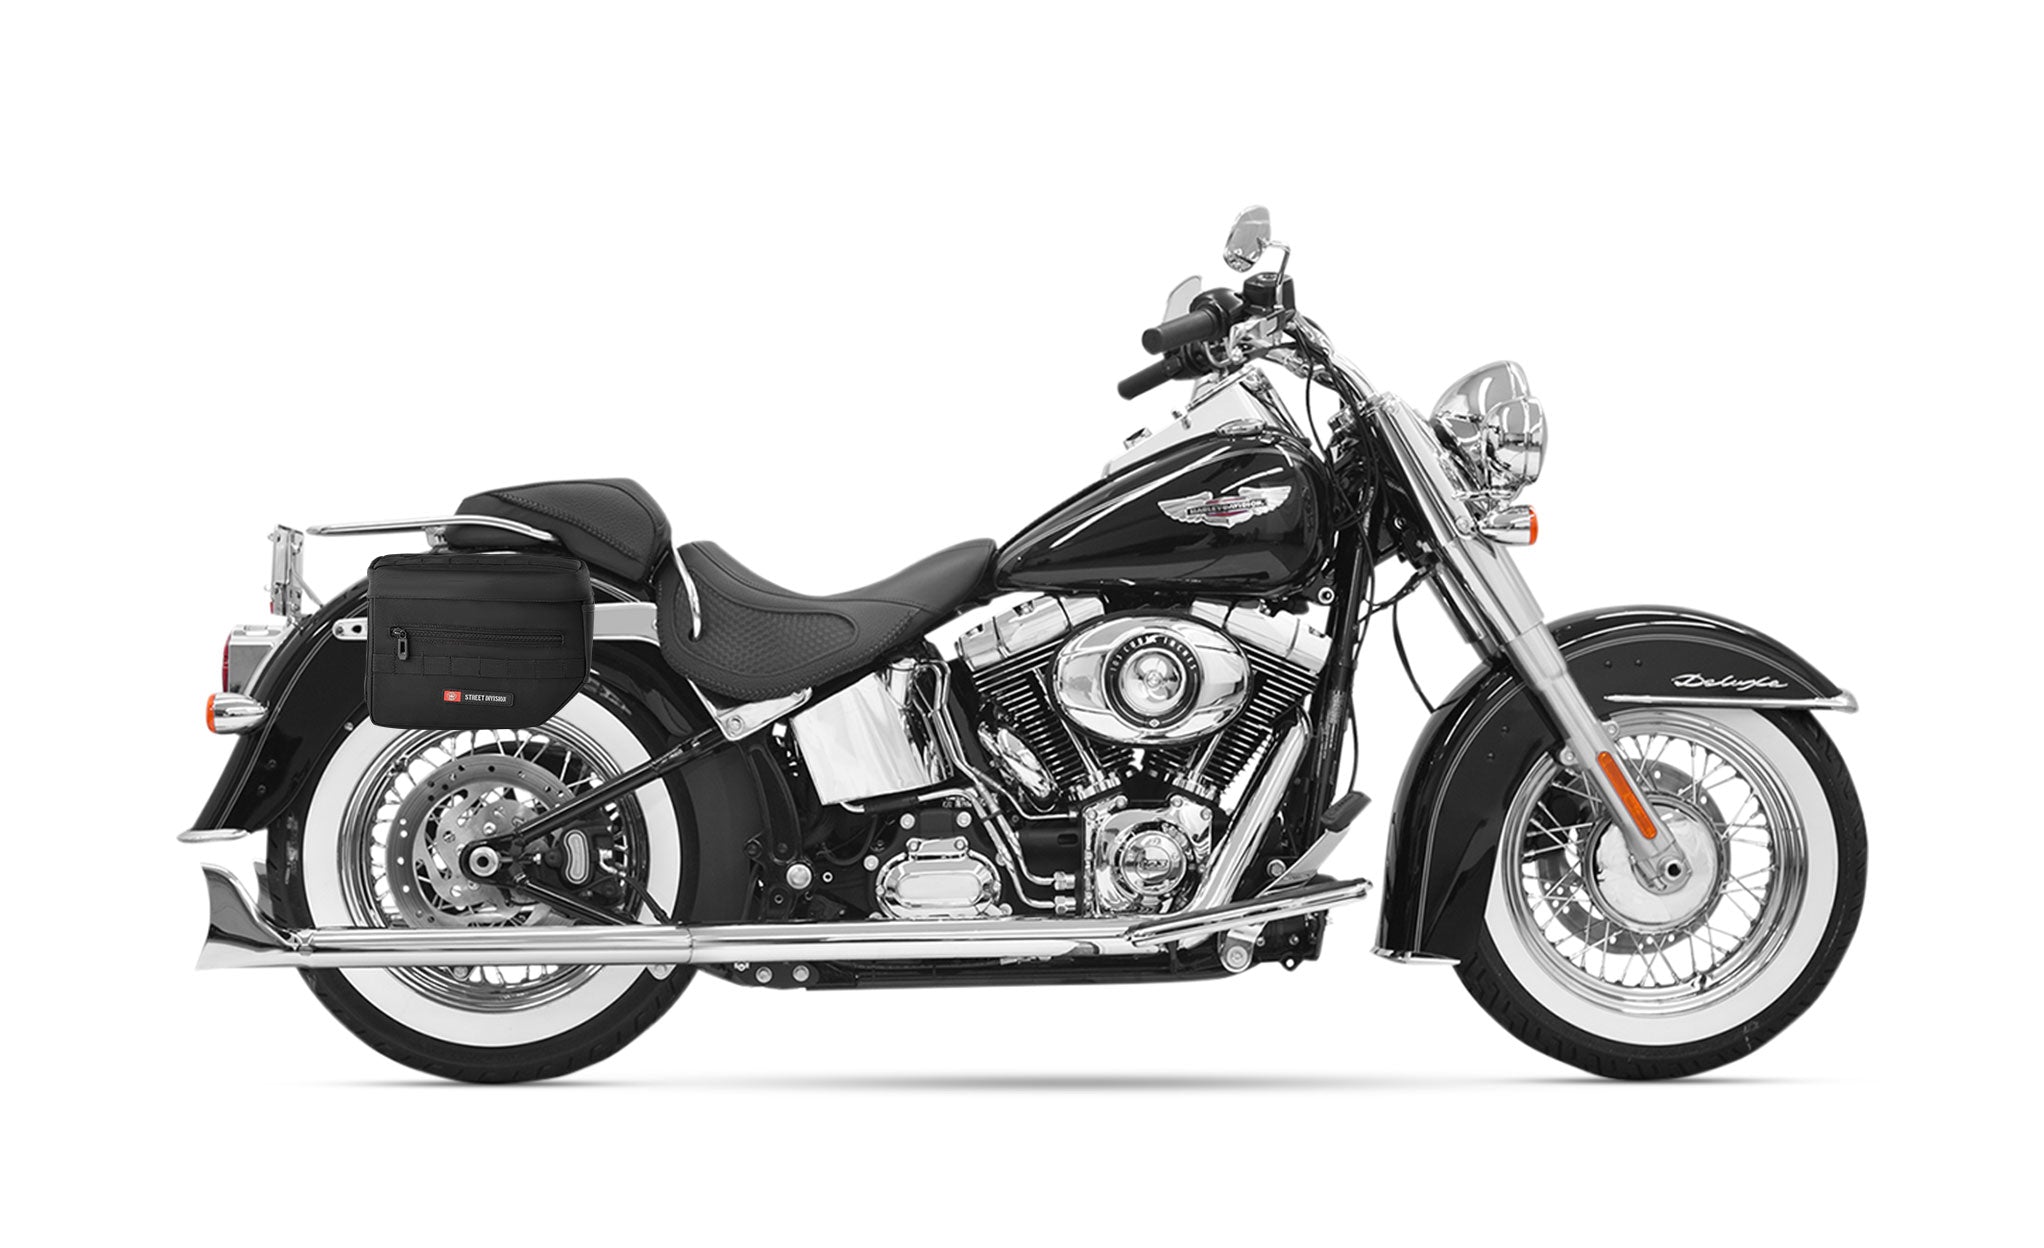 14L - Patriot Small Throw Over Saddlebags for Harley Softail Heritage FLST/I/C/CI on Bike Photo @expand